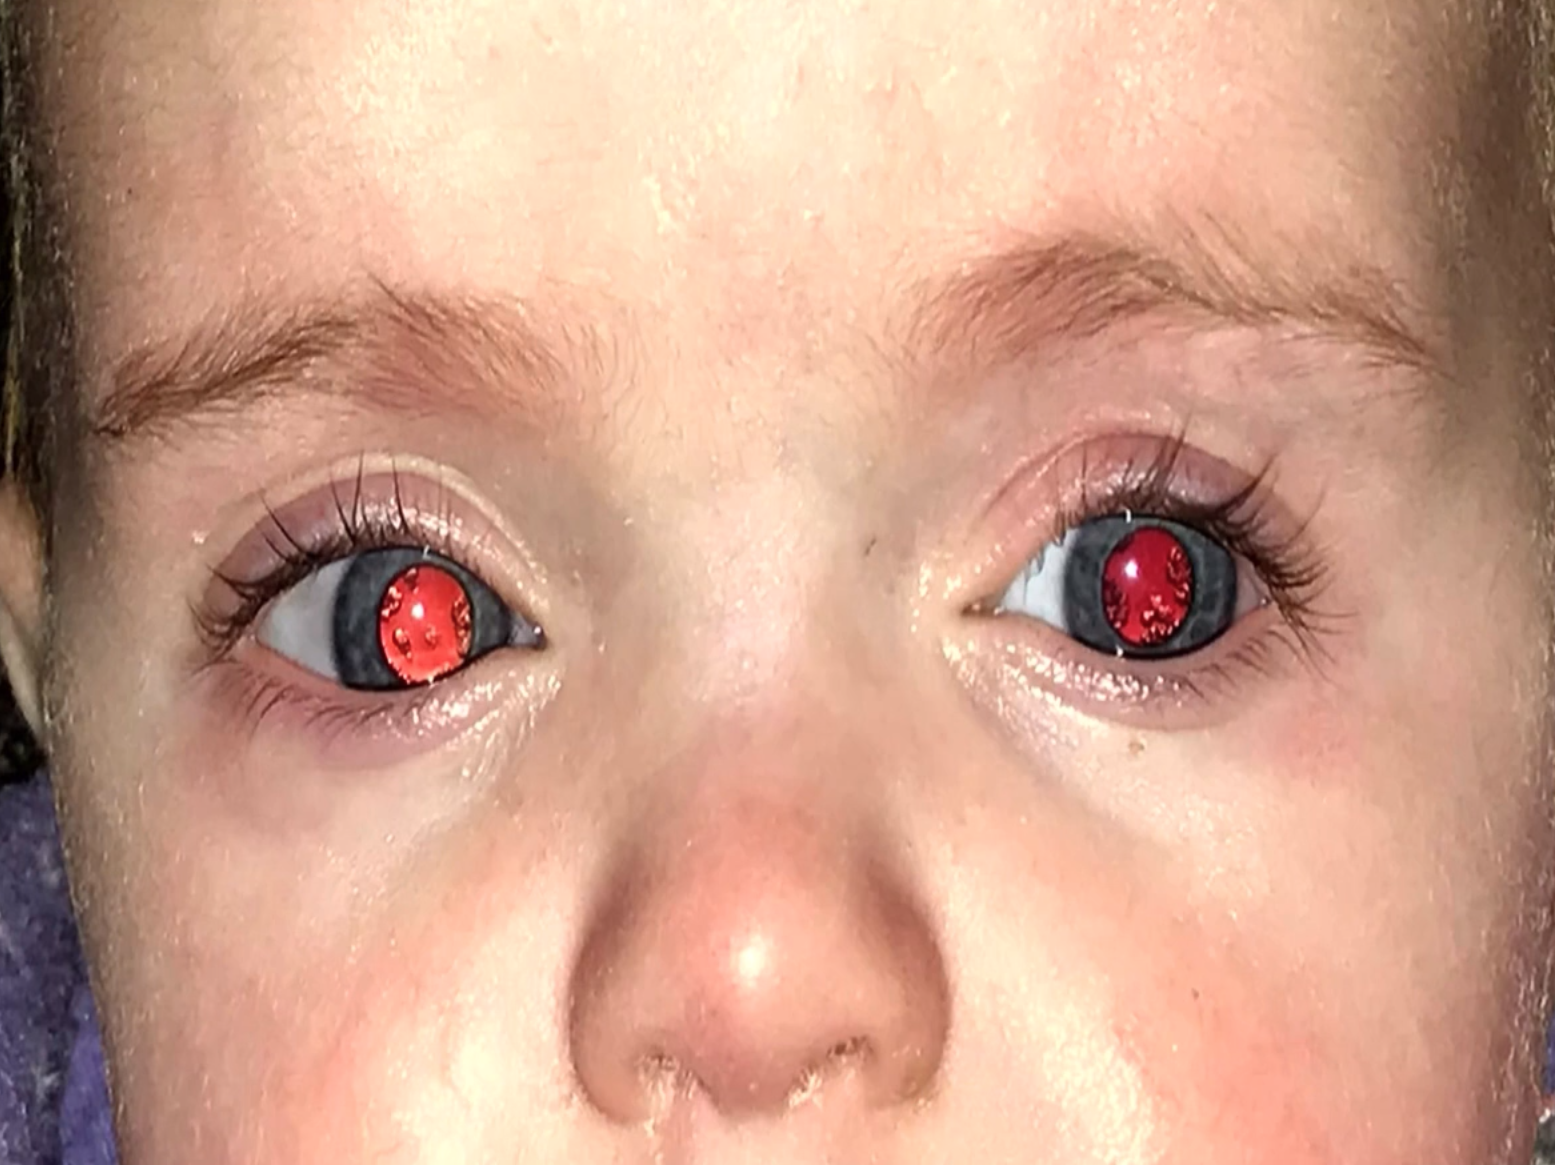 Congenital Cataracts: peripheral lenticular opacities of the type often seen in patients with galactosemia or galactokinase deficiency